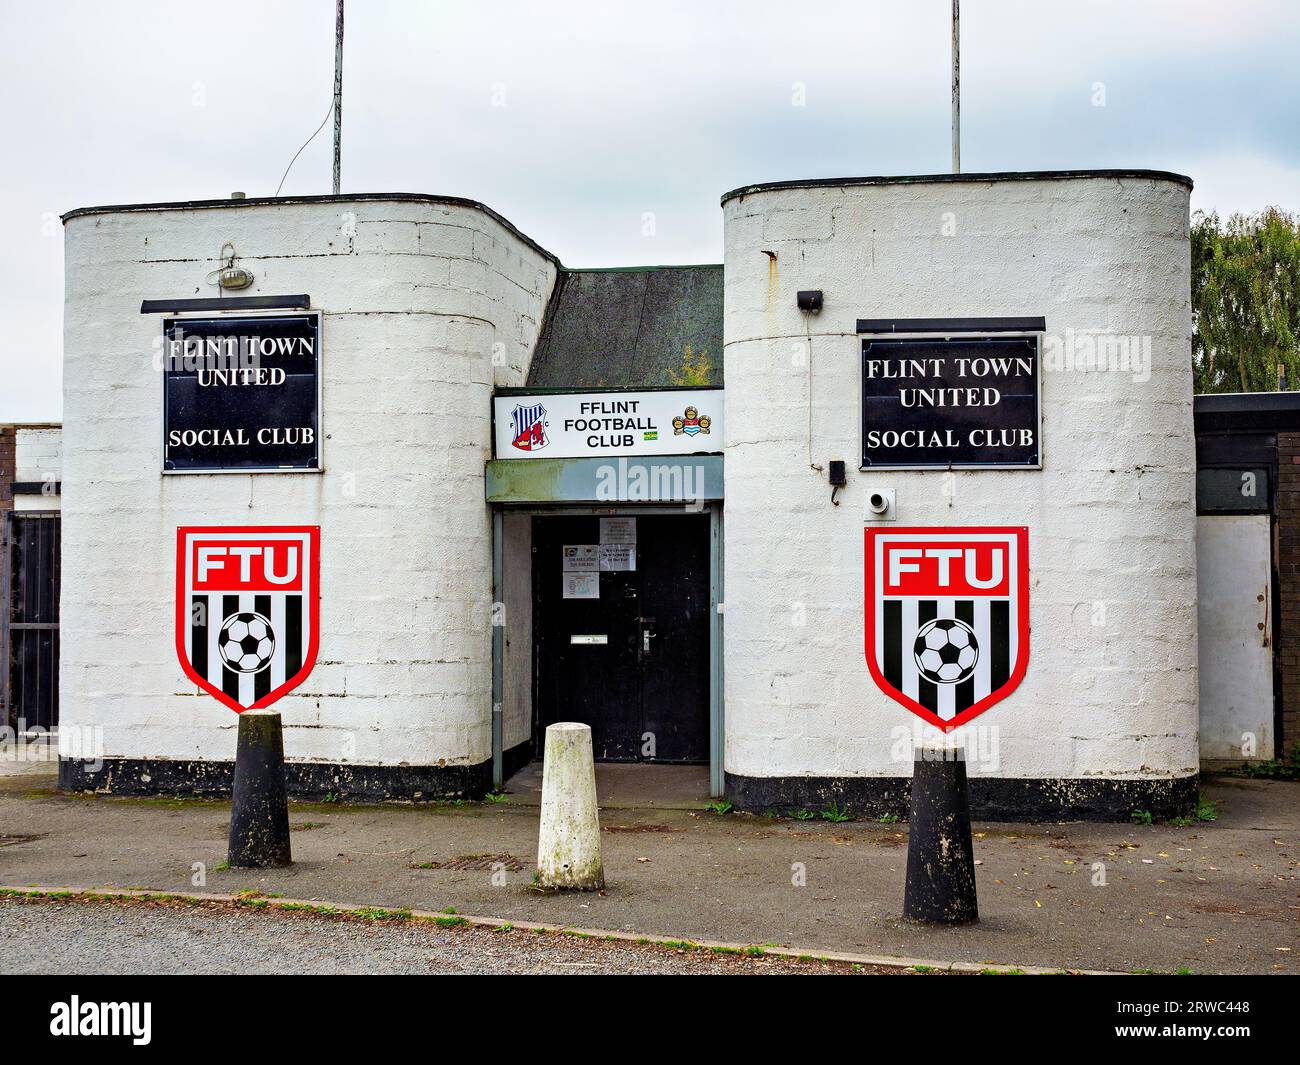 Flint north wales football club building and team logo with entrance to bar Stock Photo